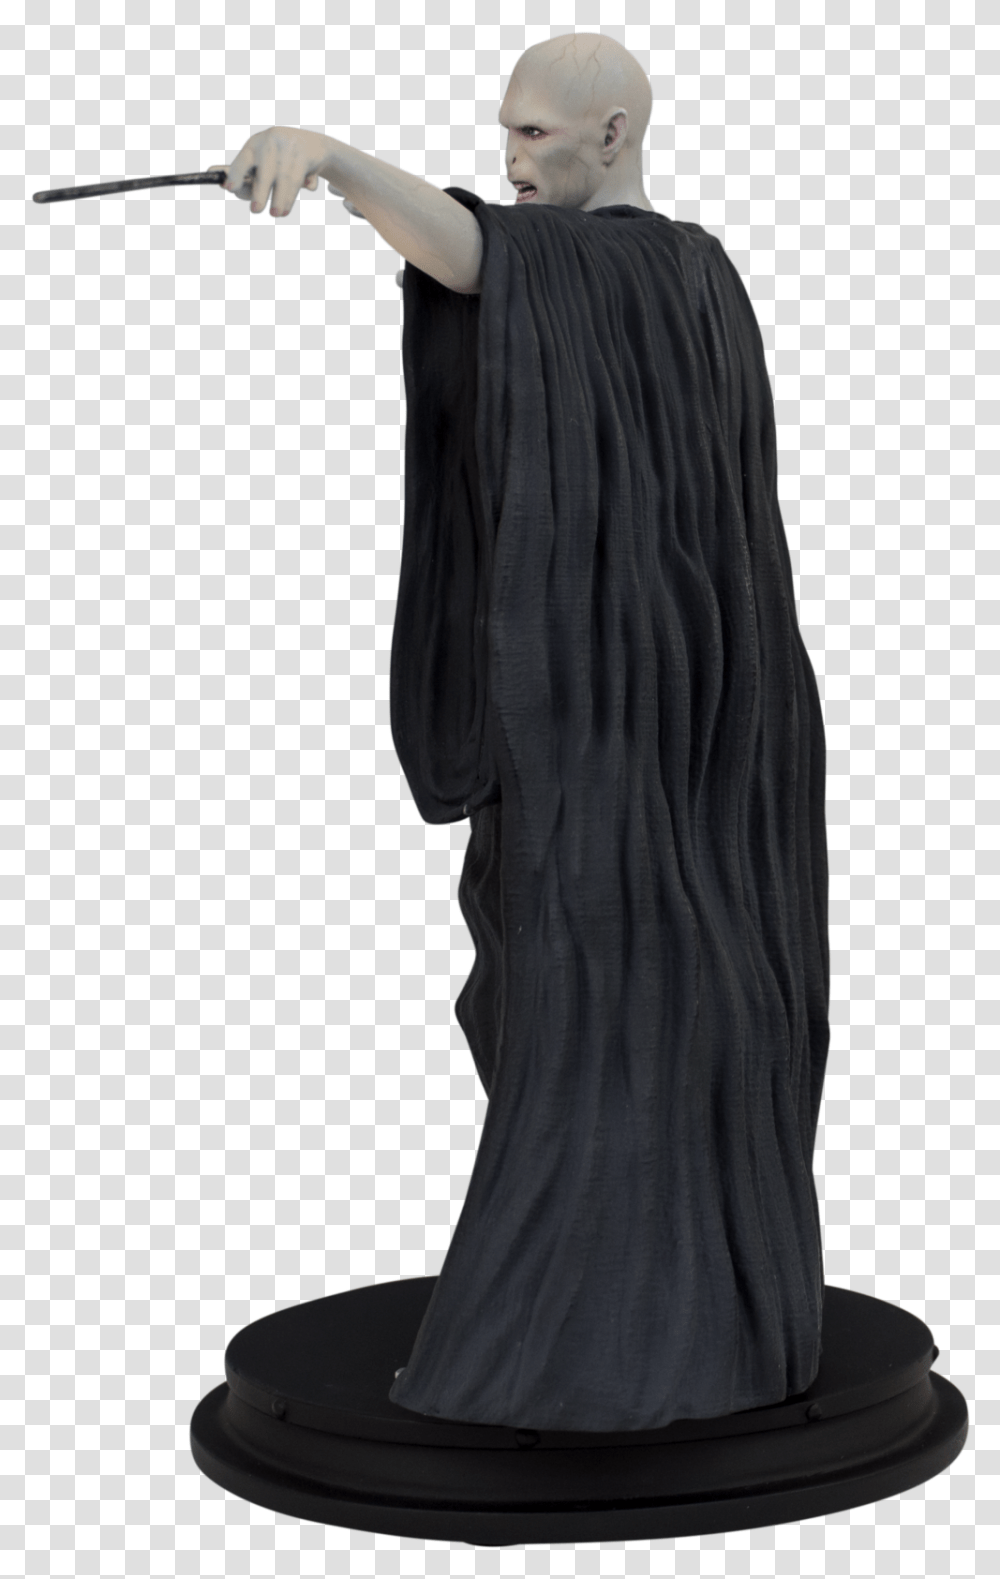 Voldemort Statue Icon Heroes Star Wars Characters, Clothing, Apparel, Fashion, Cloak Transparent Png